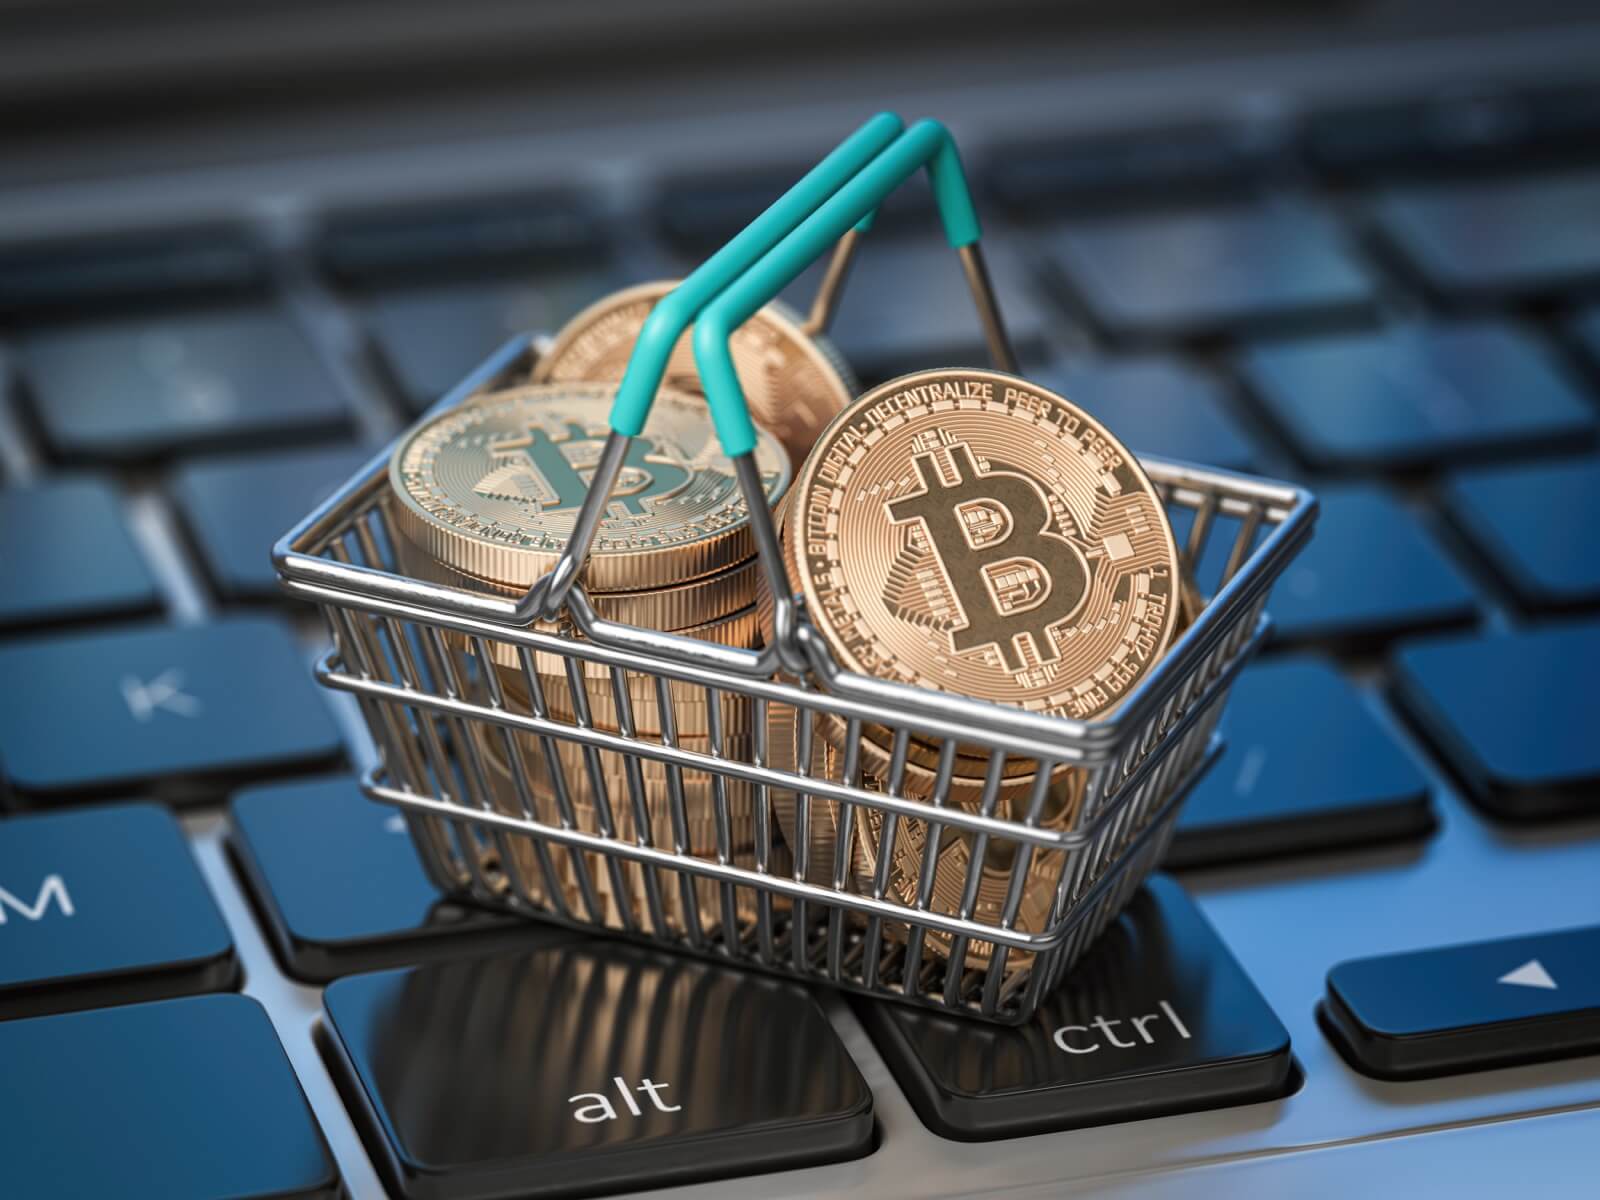 Buying a House With Cryptocurrency - Bitcoin Coins in Shopping Basket on Laptop Keyboard